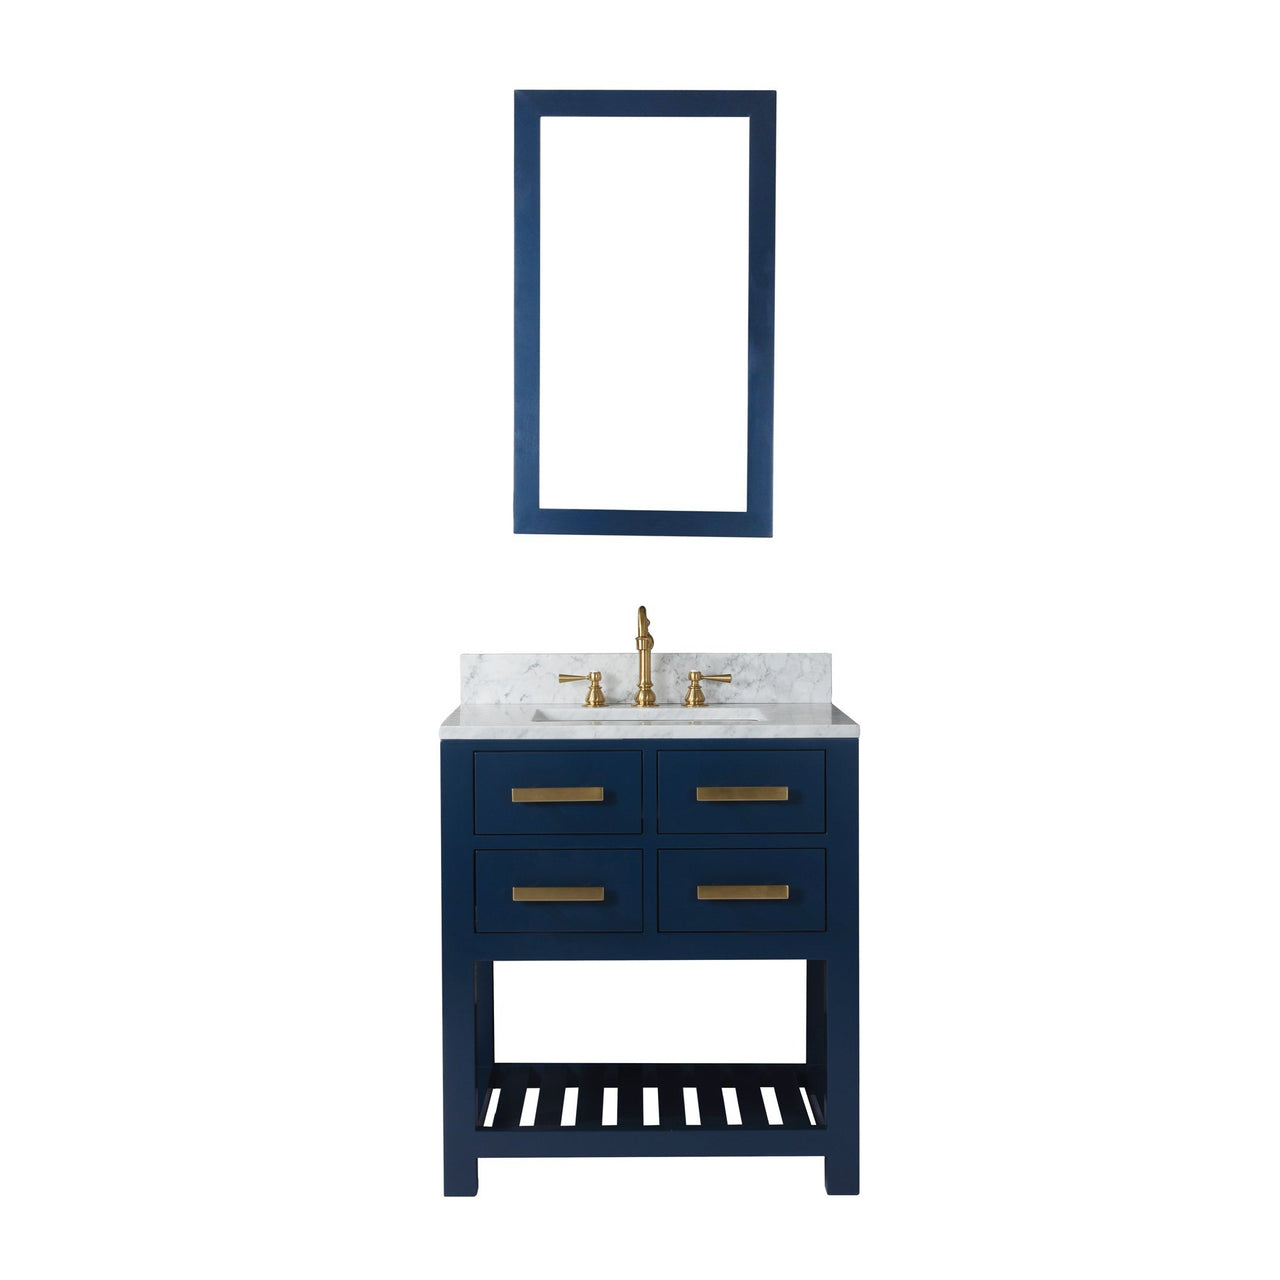 30 Inch Monarch Blue Single Sink Bathroom Vanity With Mirror From The Madalyn Collection Vanity Water Creation 